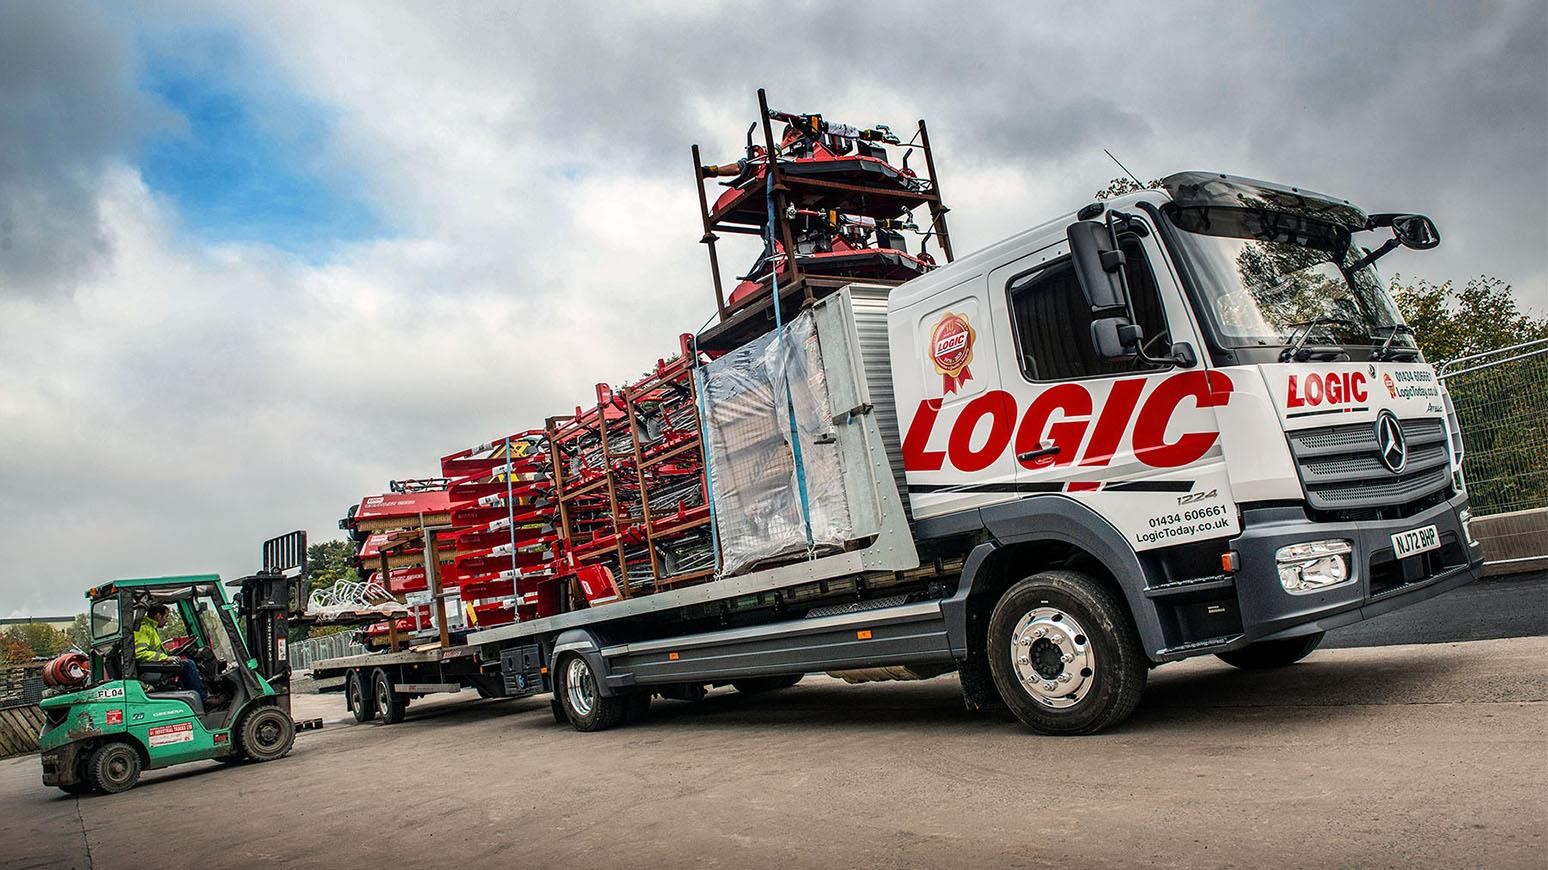 Mercedes-Benz Atego Helps Logic Transport Trailers, Implements & Accessories